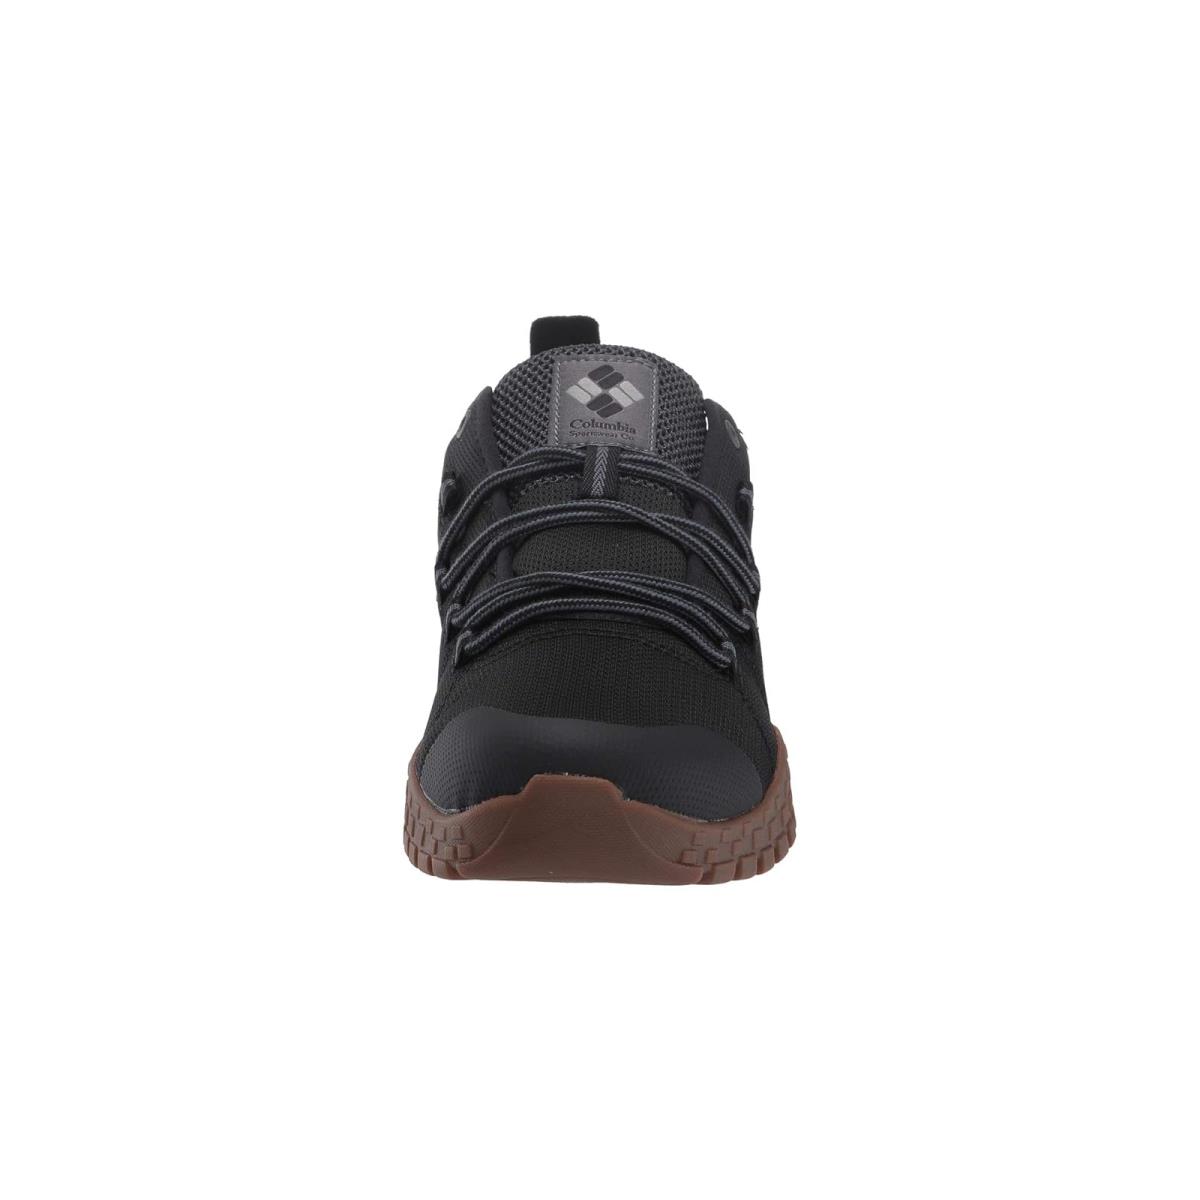 Man`s Sneakers Athletic Shoes Columbia Fairbanks Low Black/Graphite